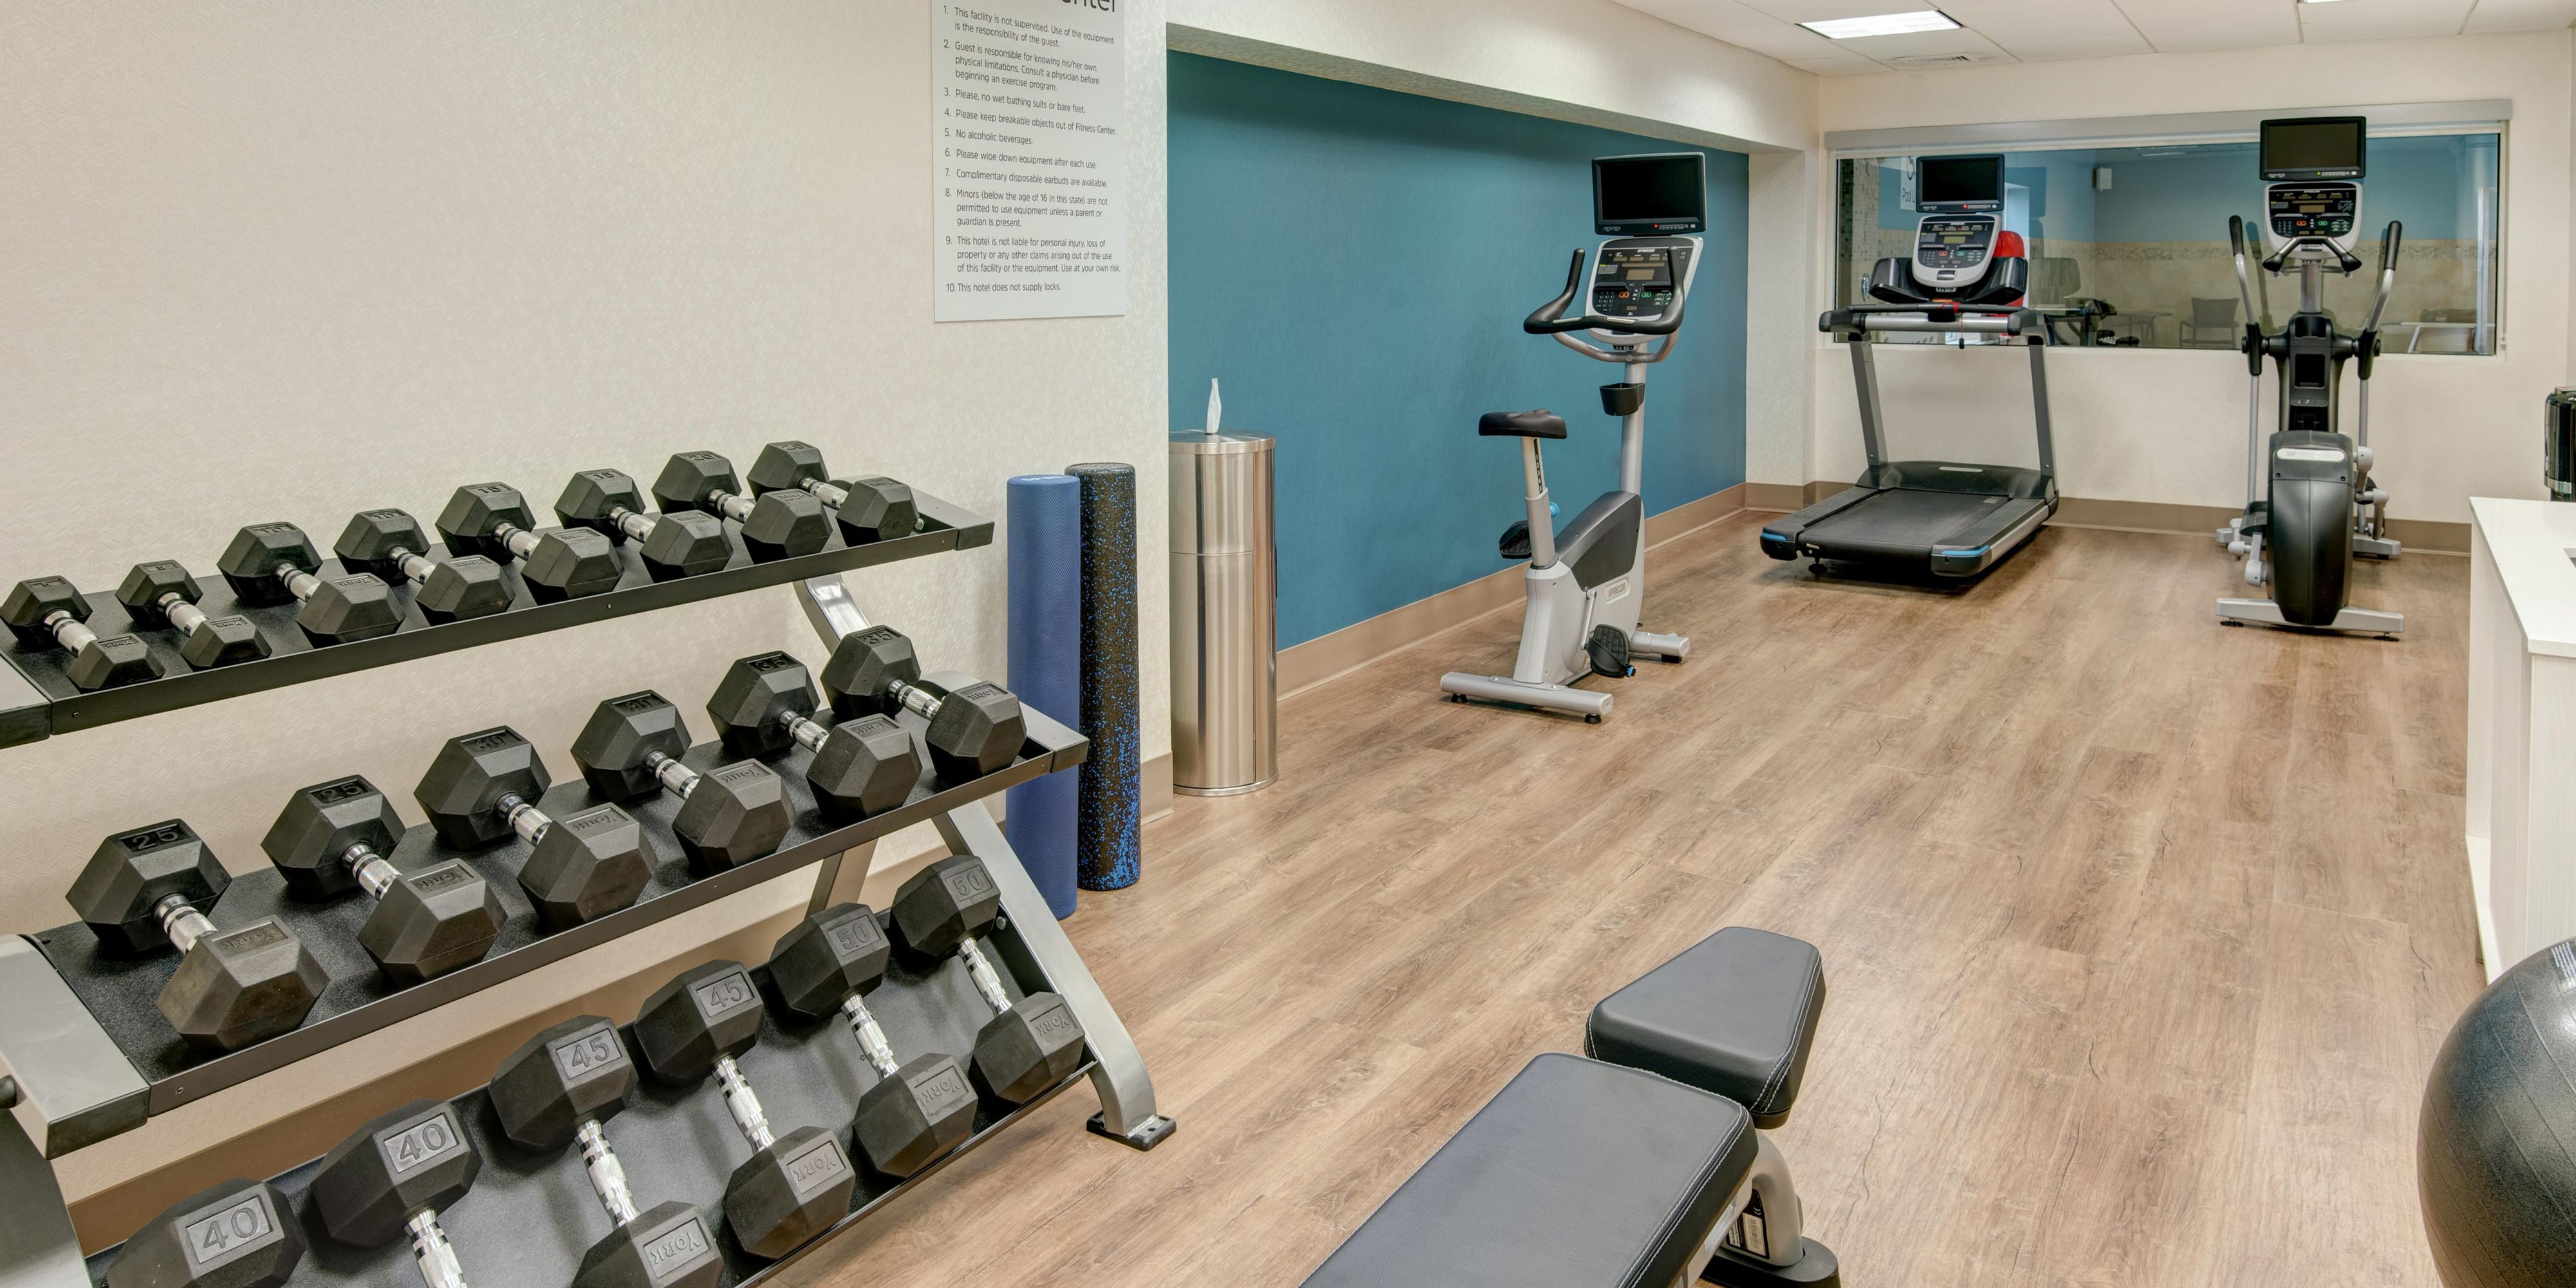 Turbocharge your energy in our modern fitness center with training equipment and cardio machines.